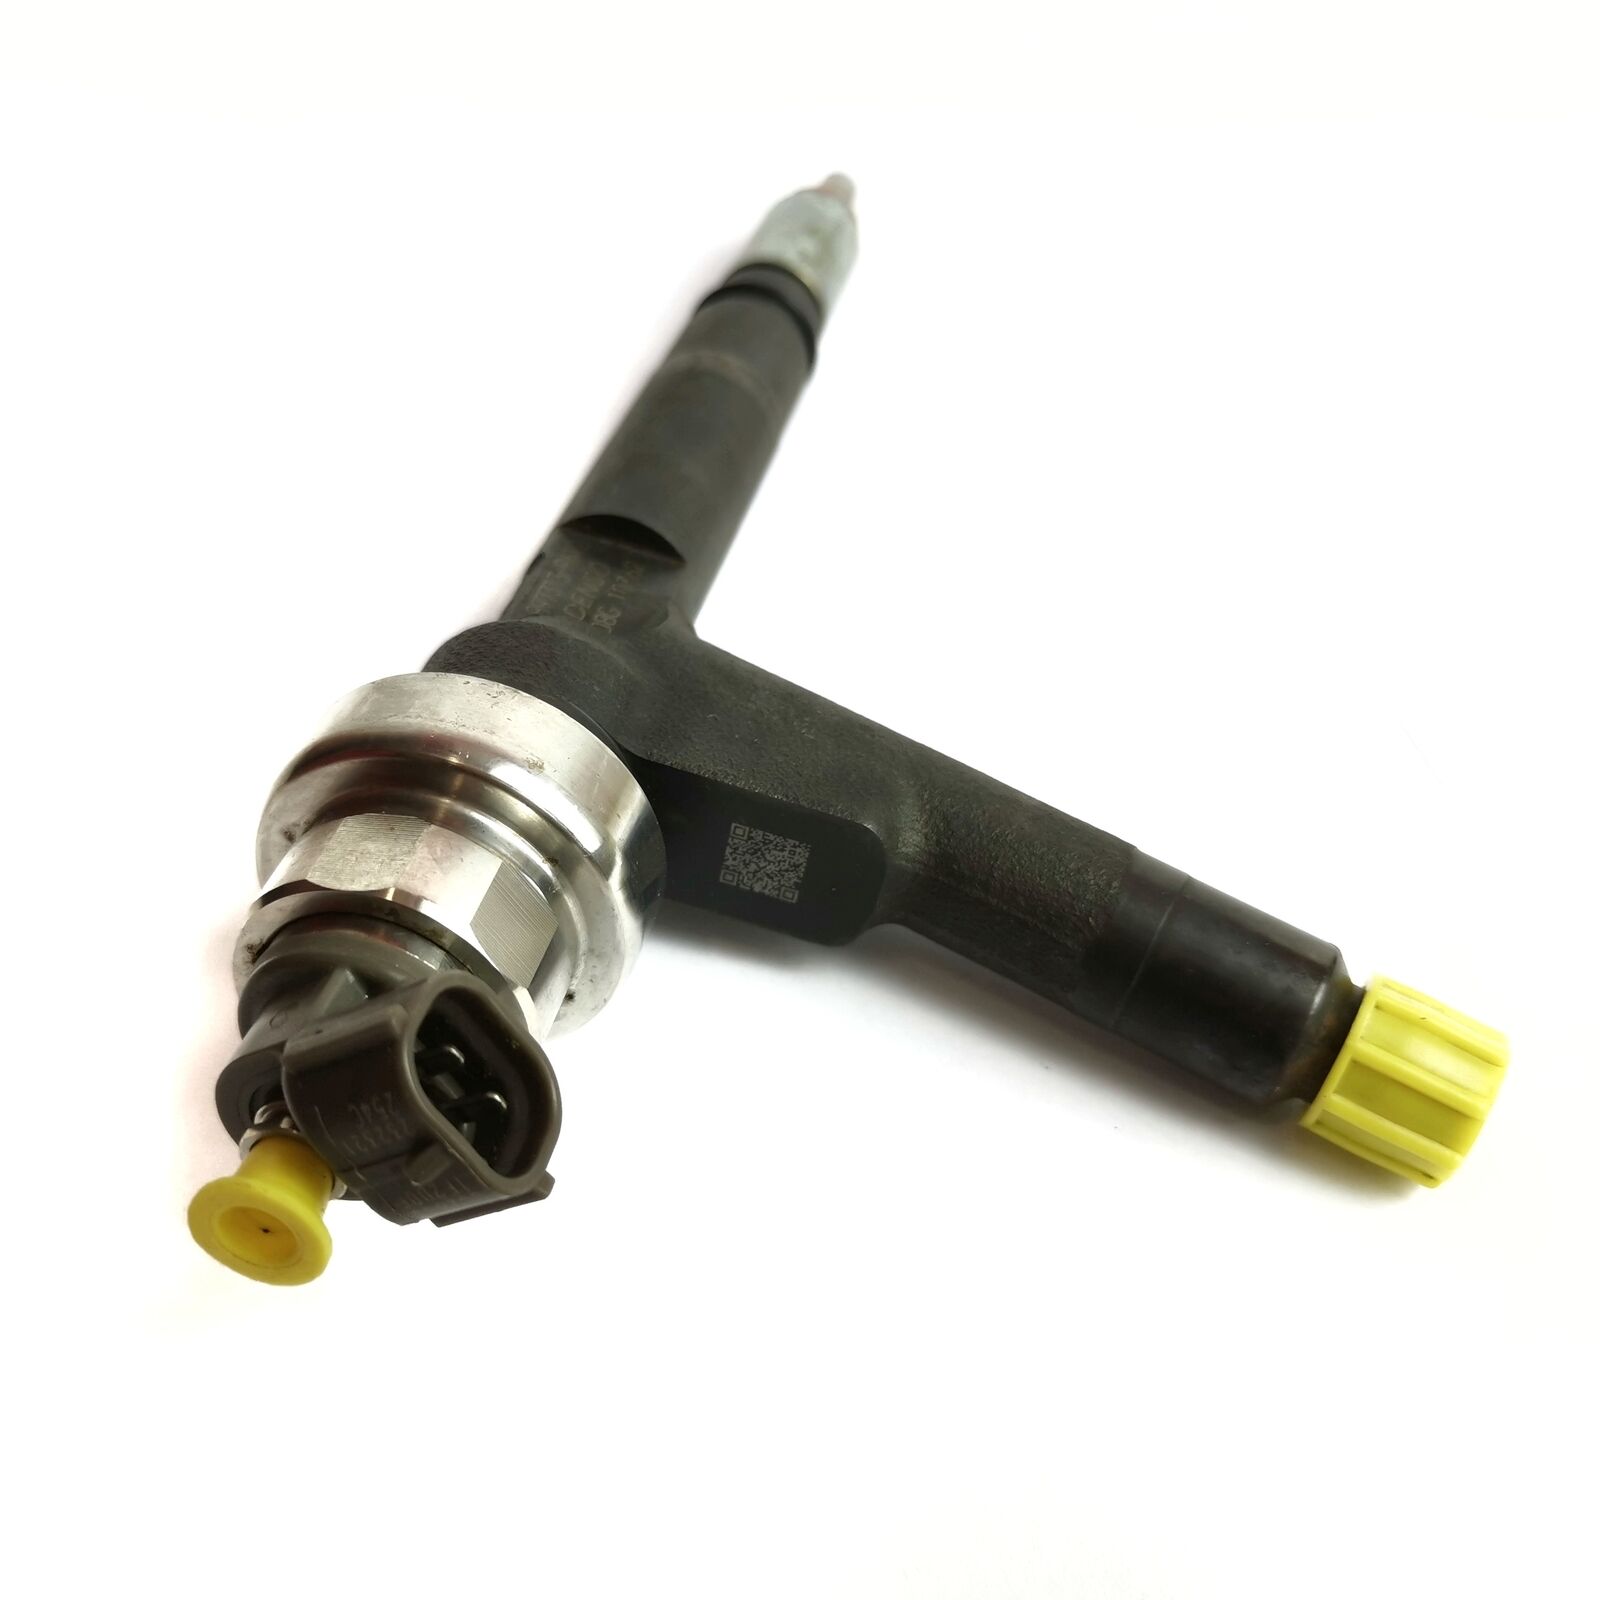 Denso Fuel Injector fits Opel Astra Combo 1.7L Engine 095000-5085